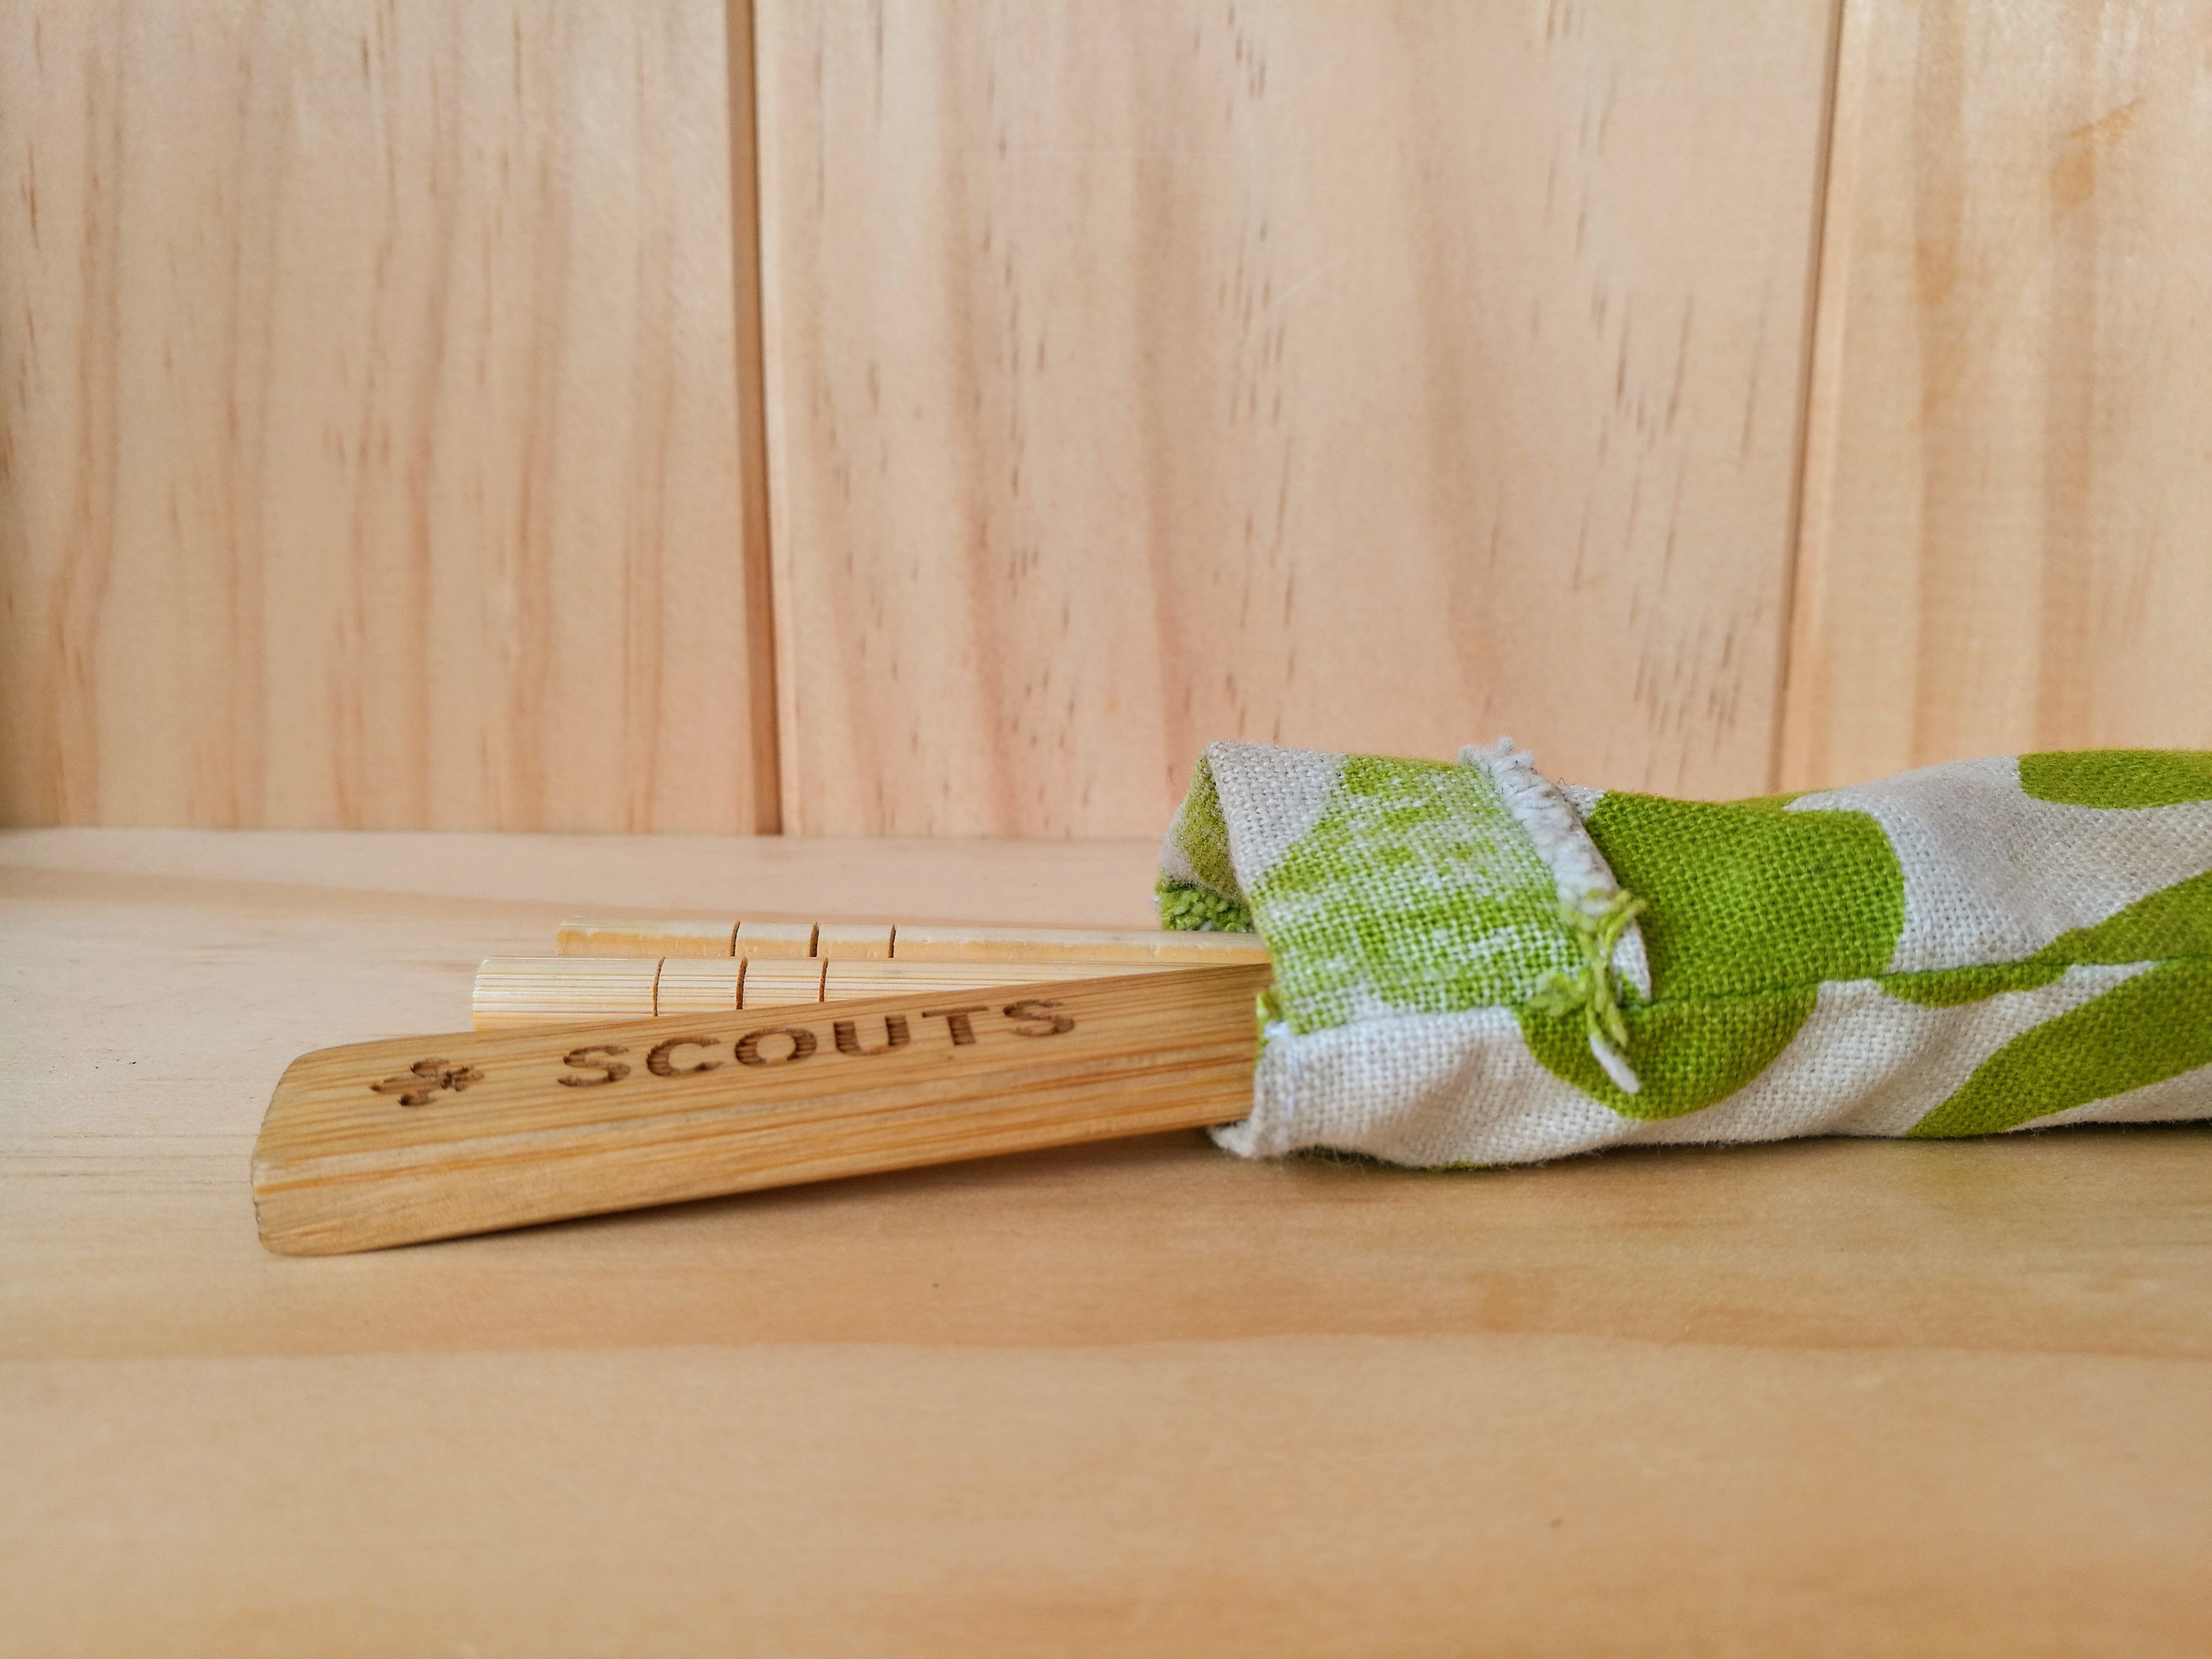 reusable chopsticks and spoon in a cloth bag